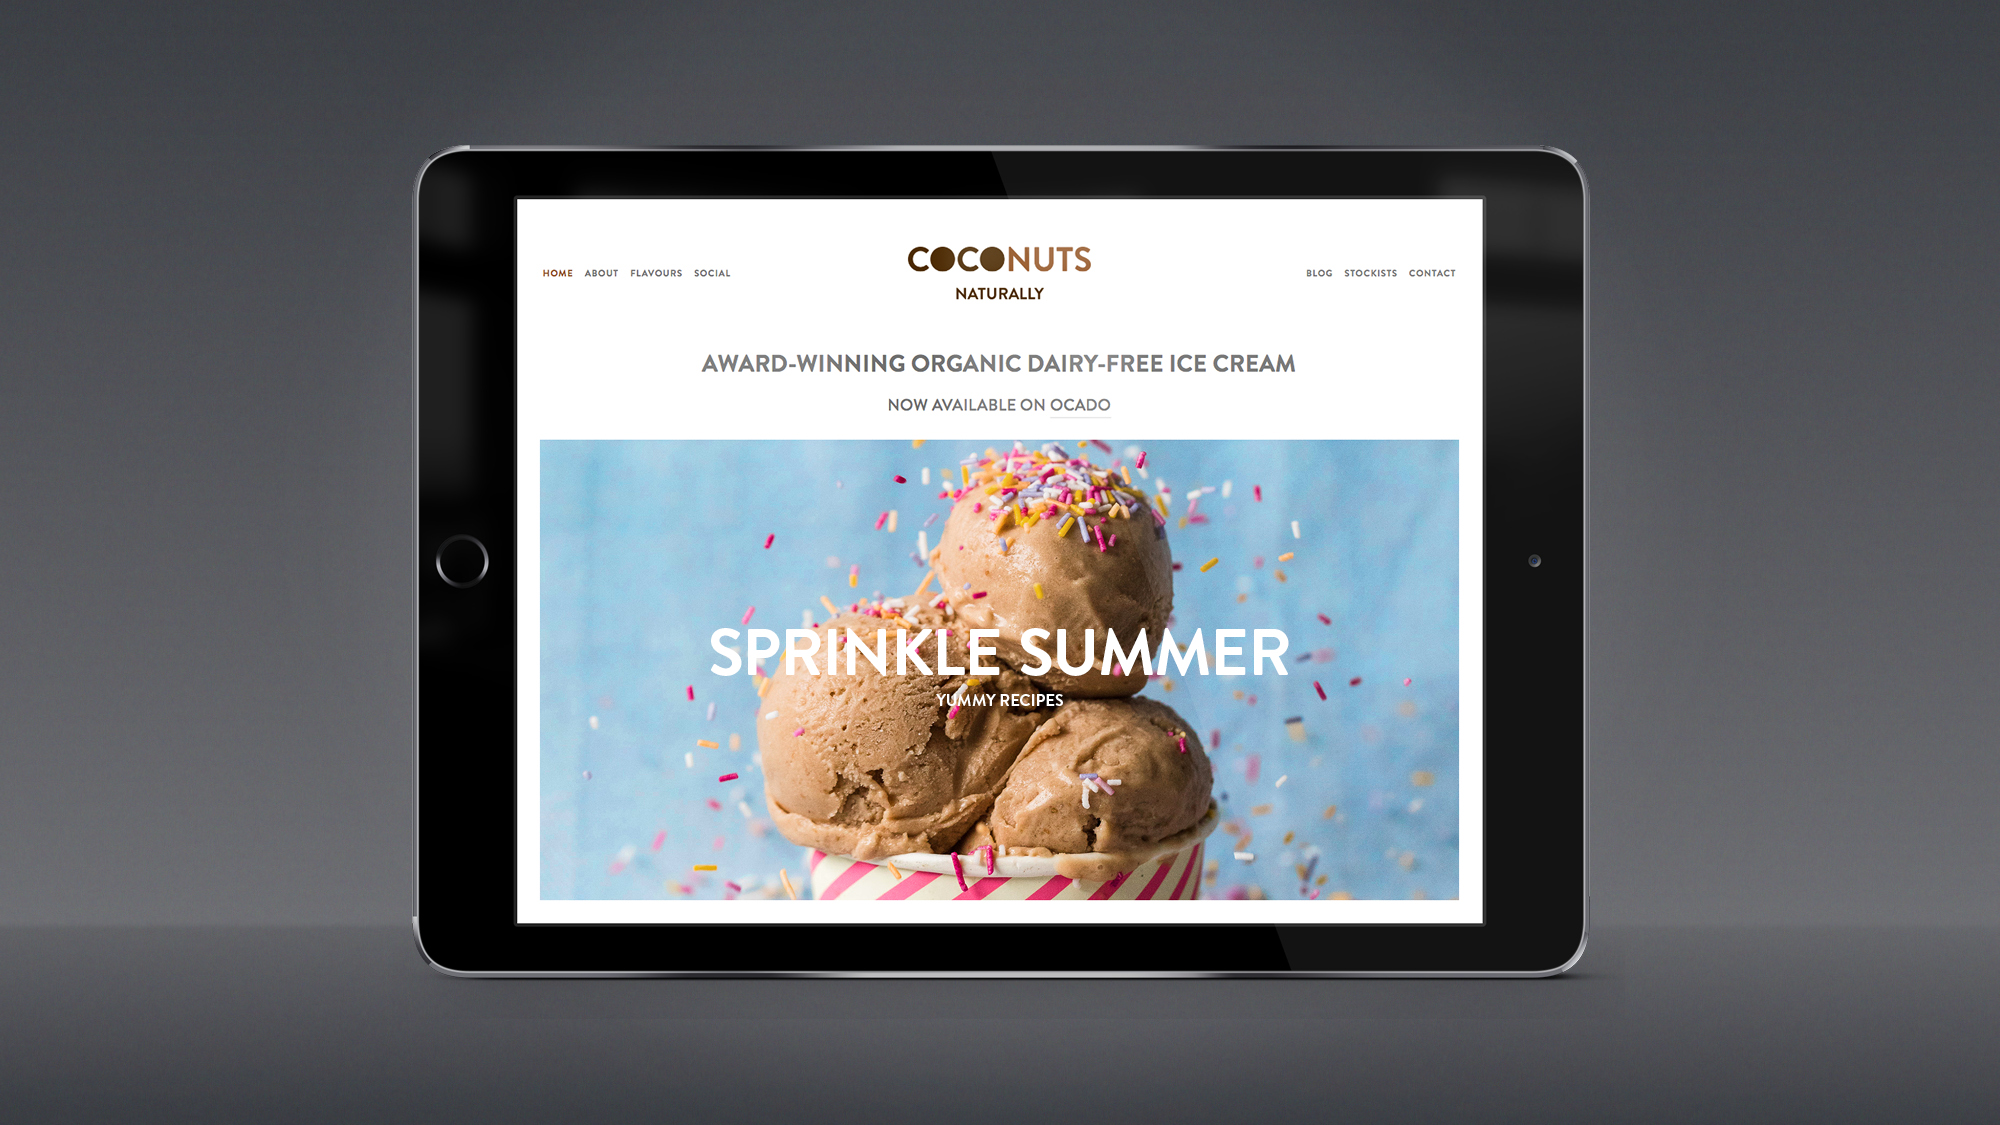 Entity-3-Three-Brand-Design-Agency-Sydney-CocoNuts-9-experience-digital-site-promotion